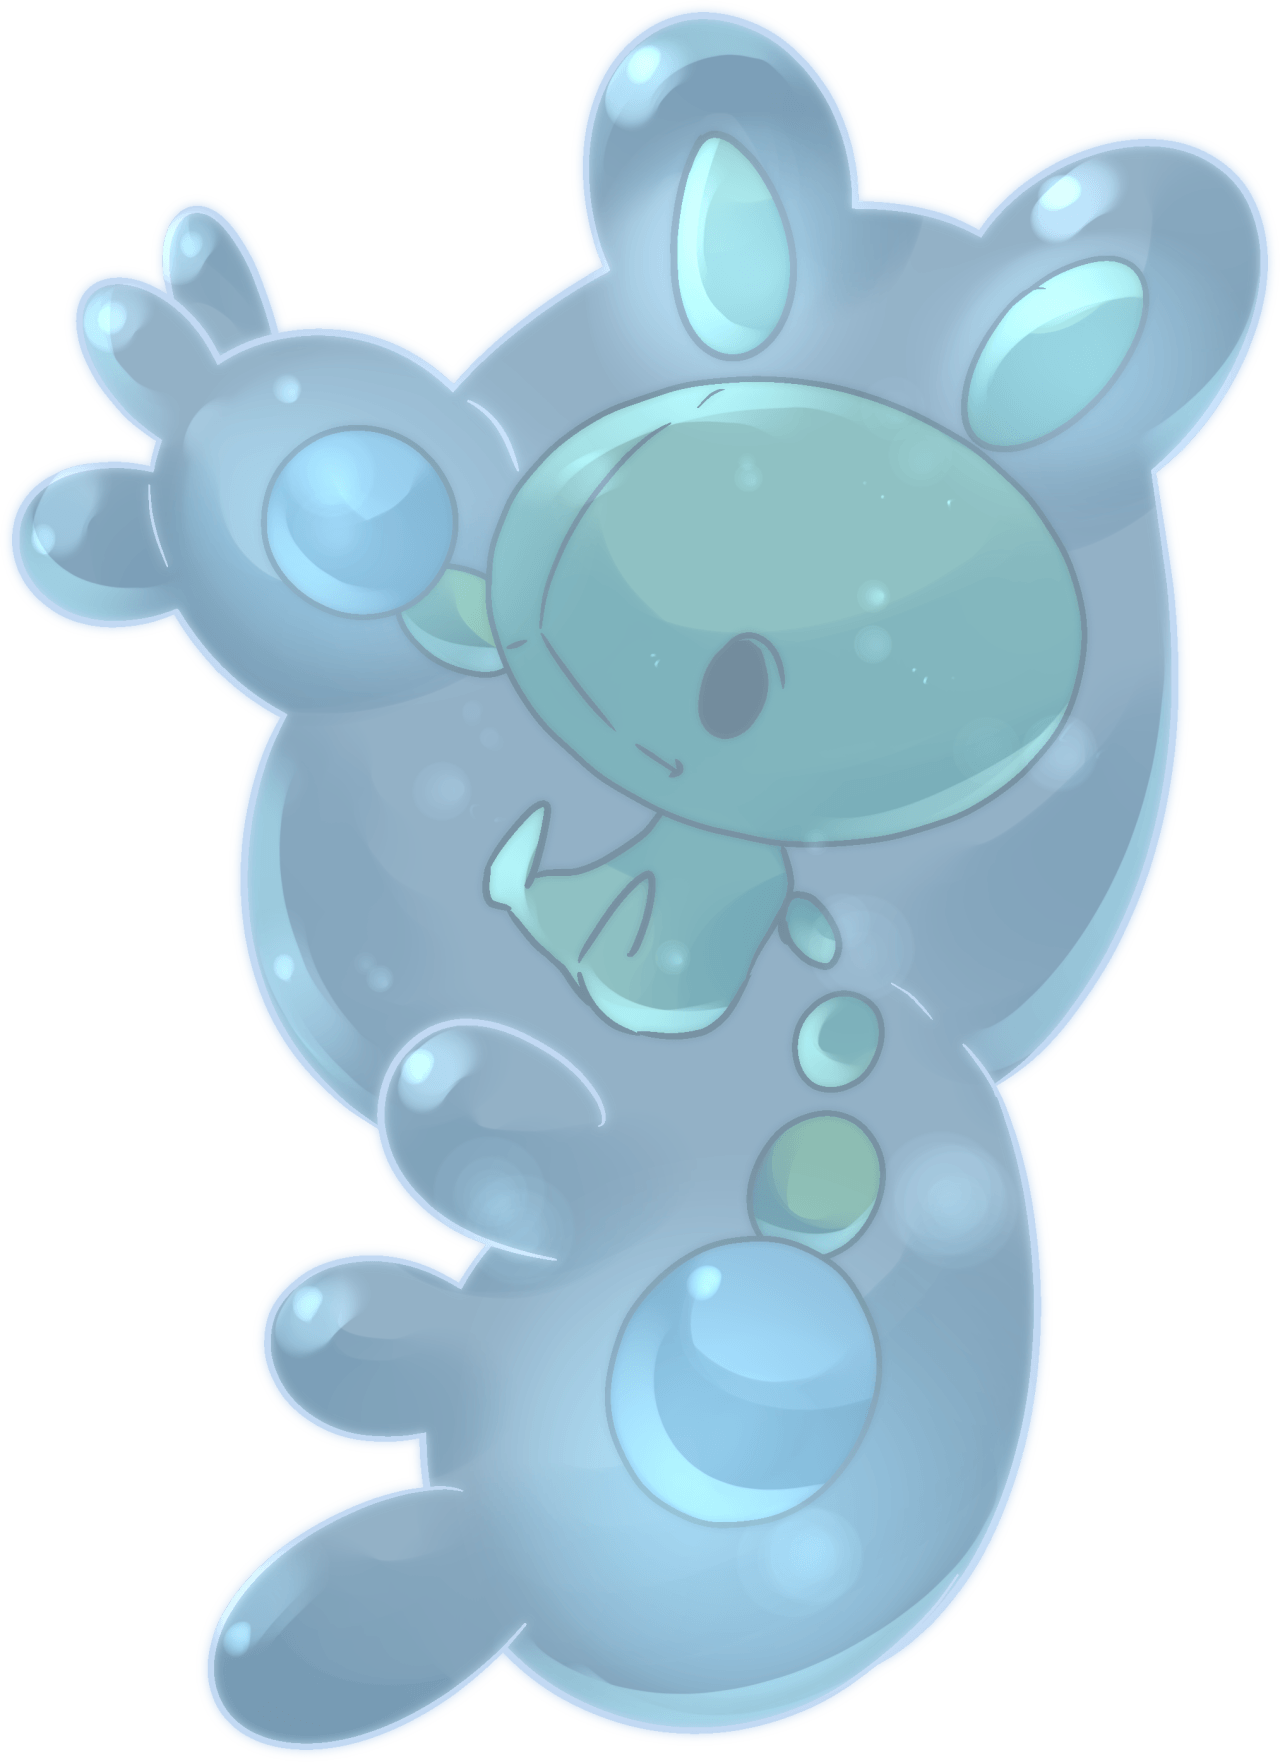 Image result for reuniclus shiny. Xander's stuff